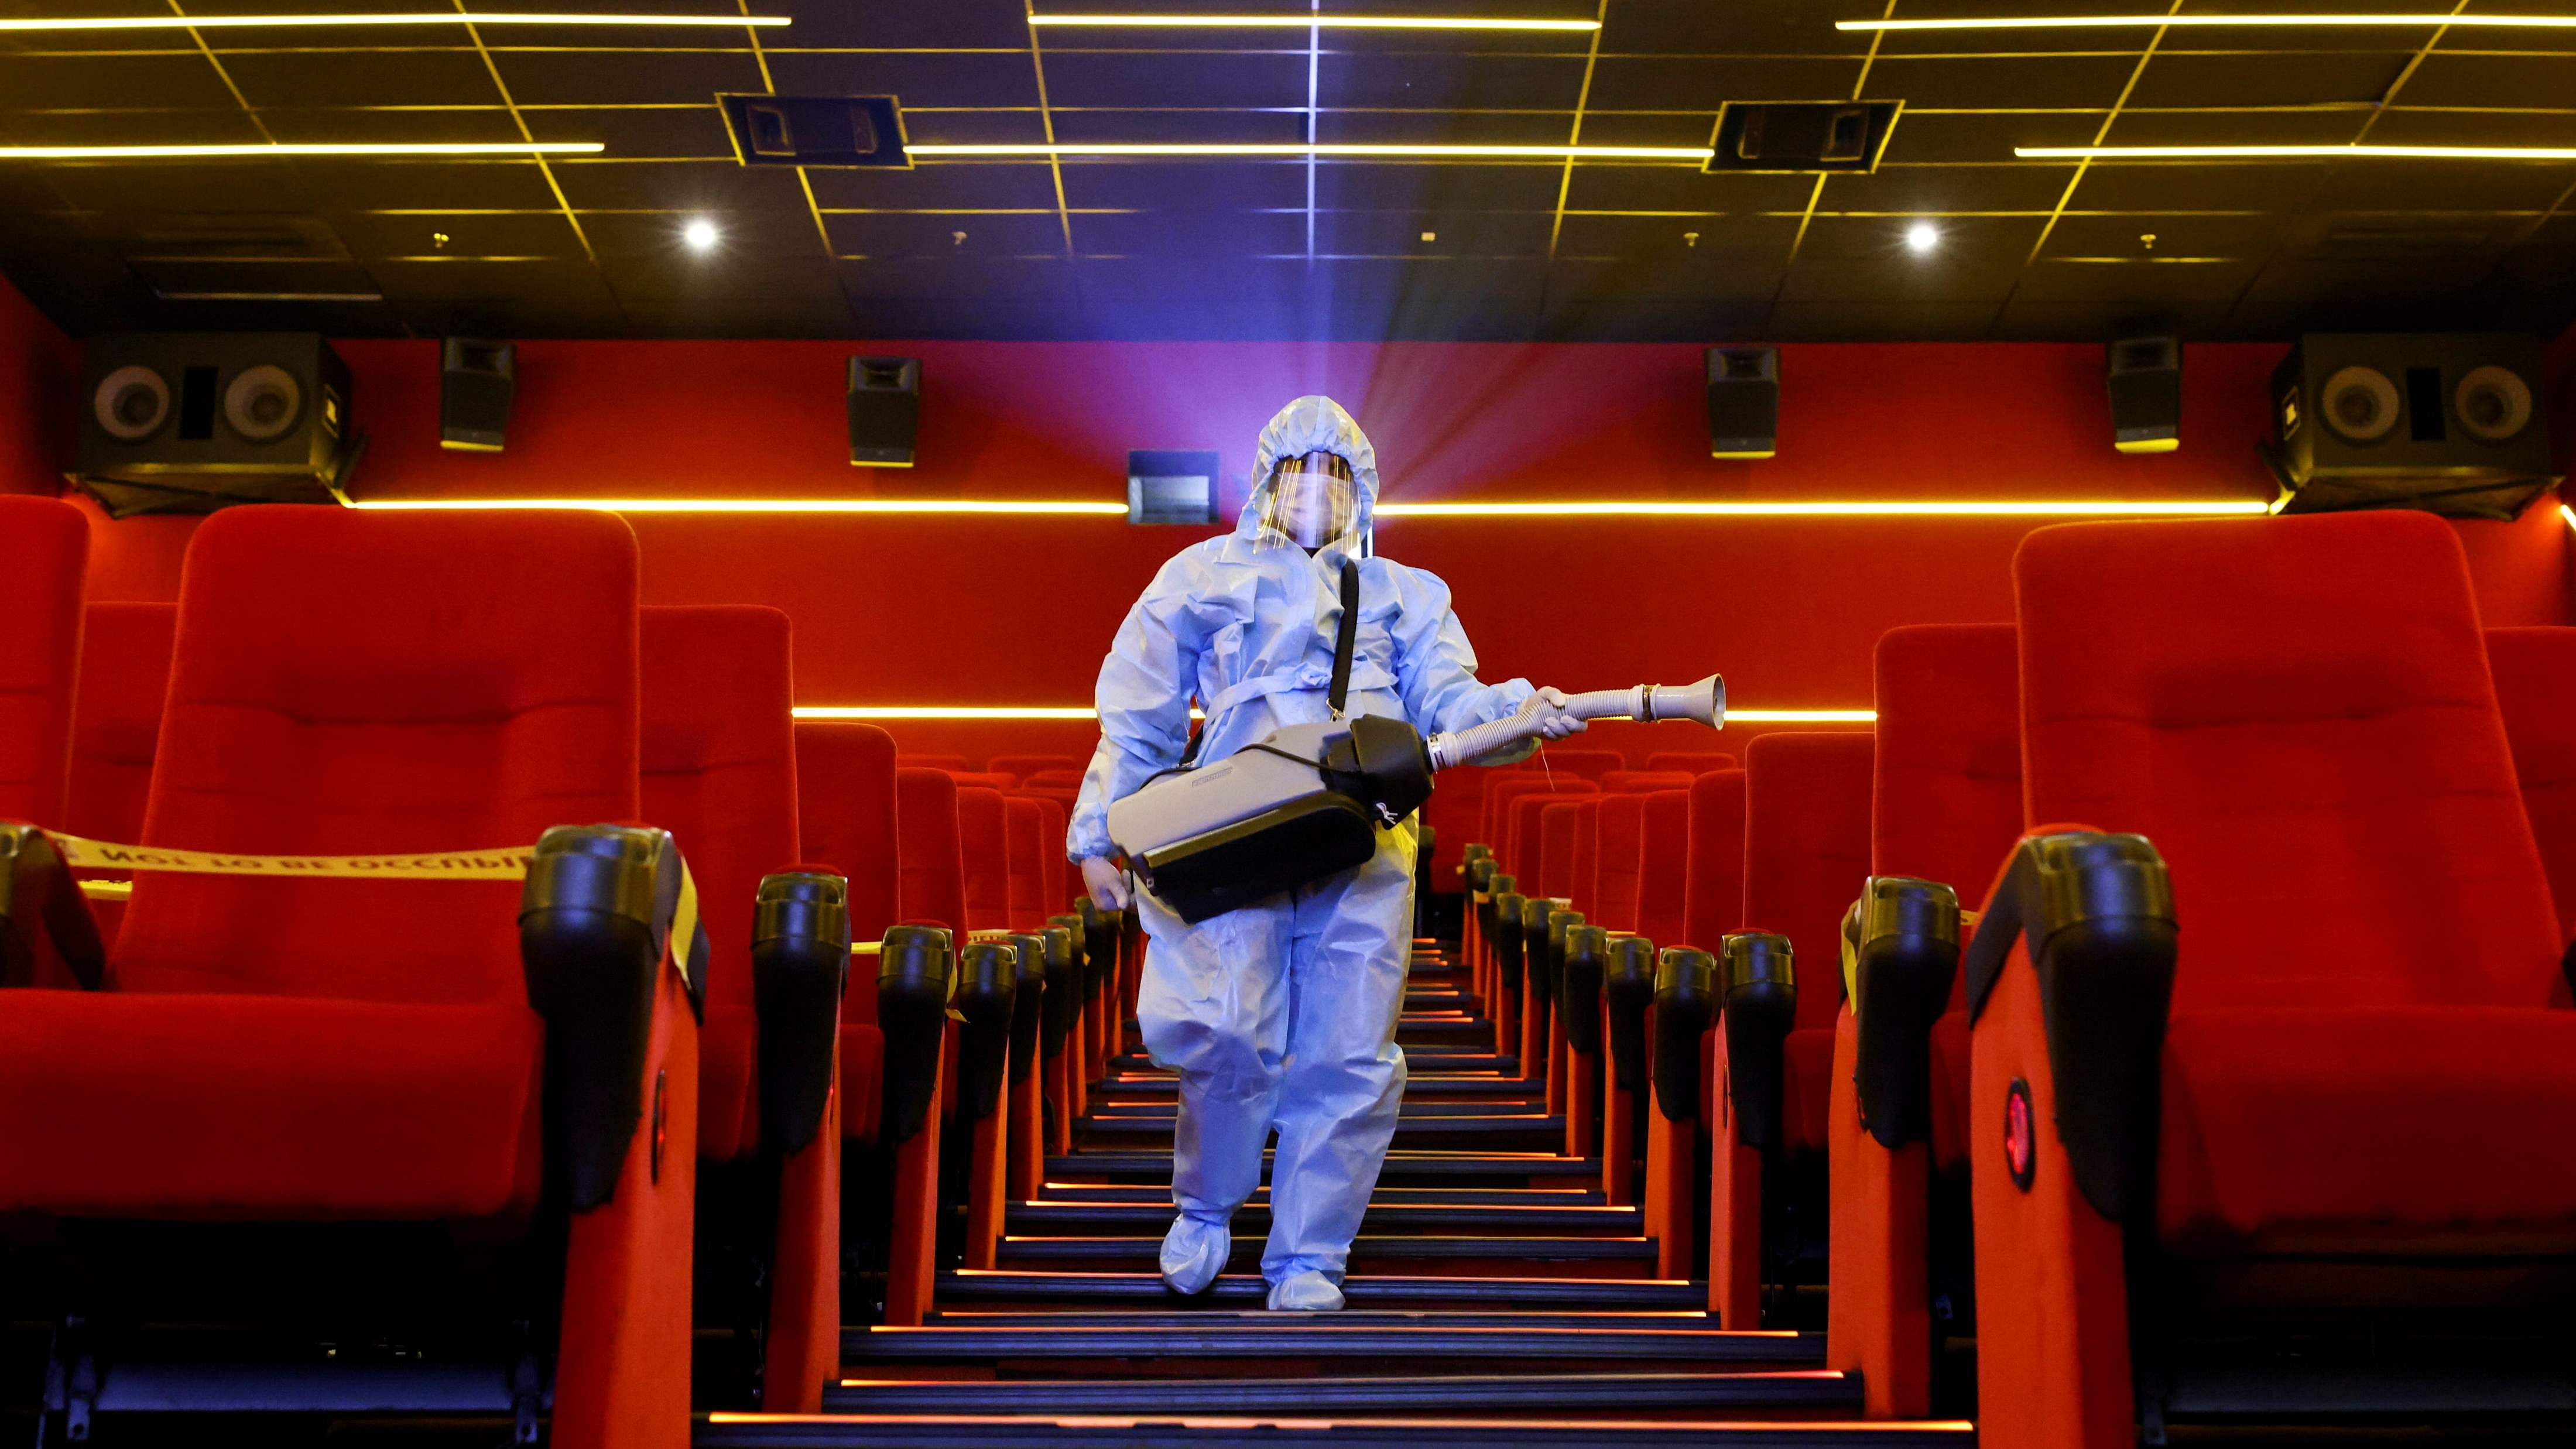 A worker wearing personal protective equipment (PPE) sanitizes seats inside a movie theatre. Credit: Reuters File Photo